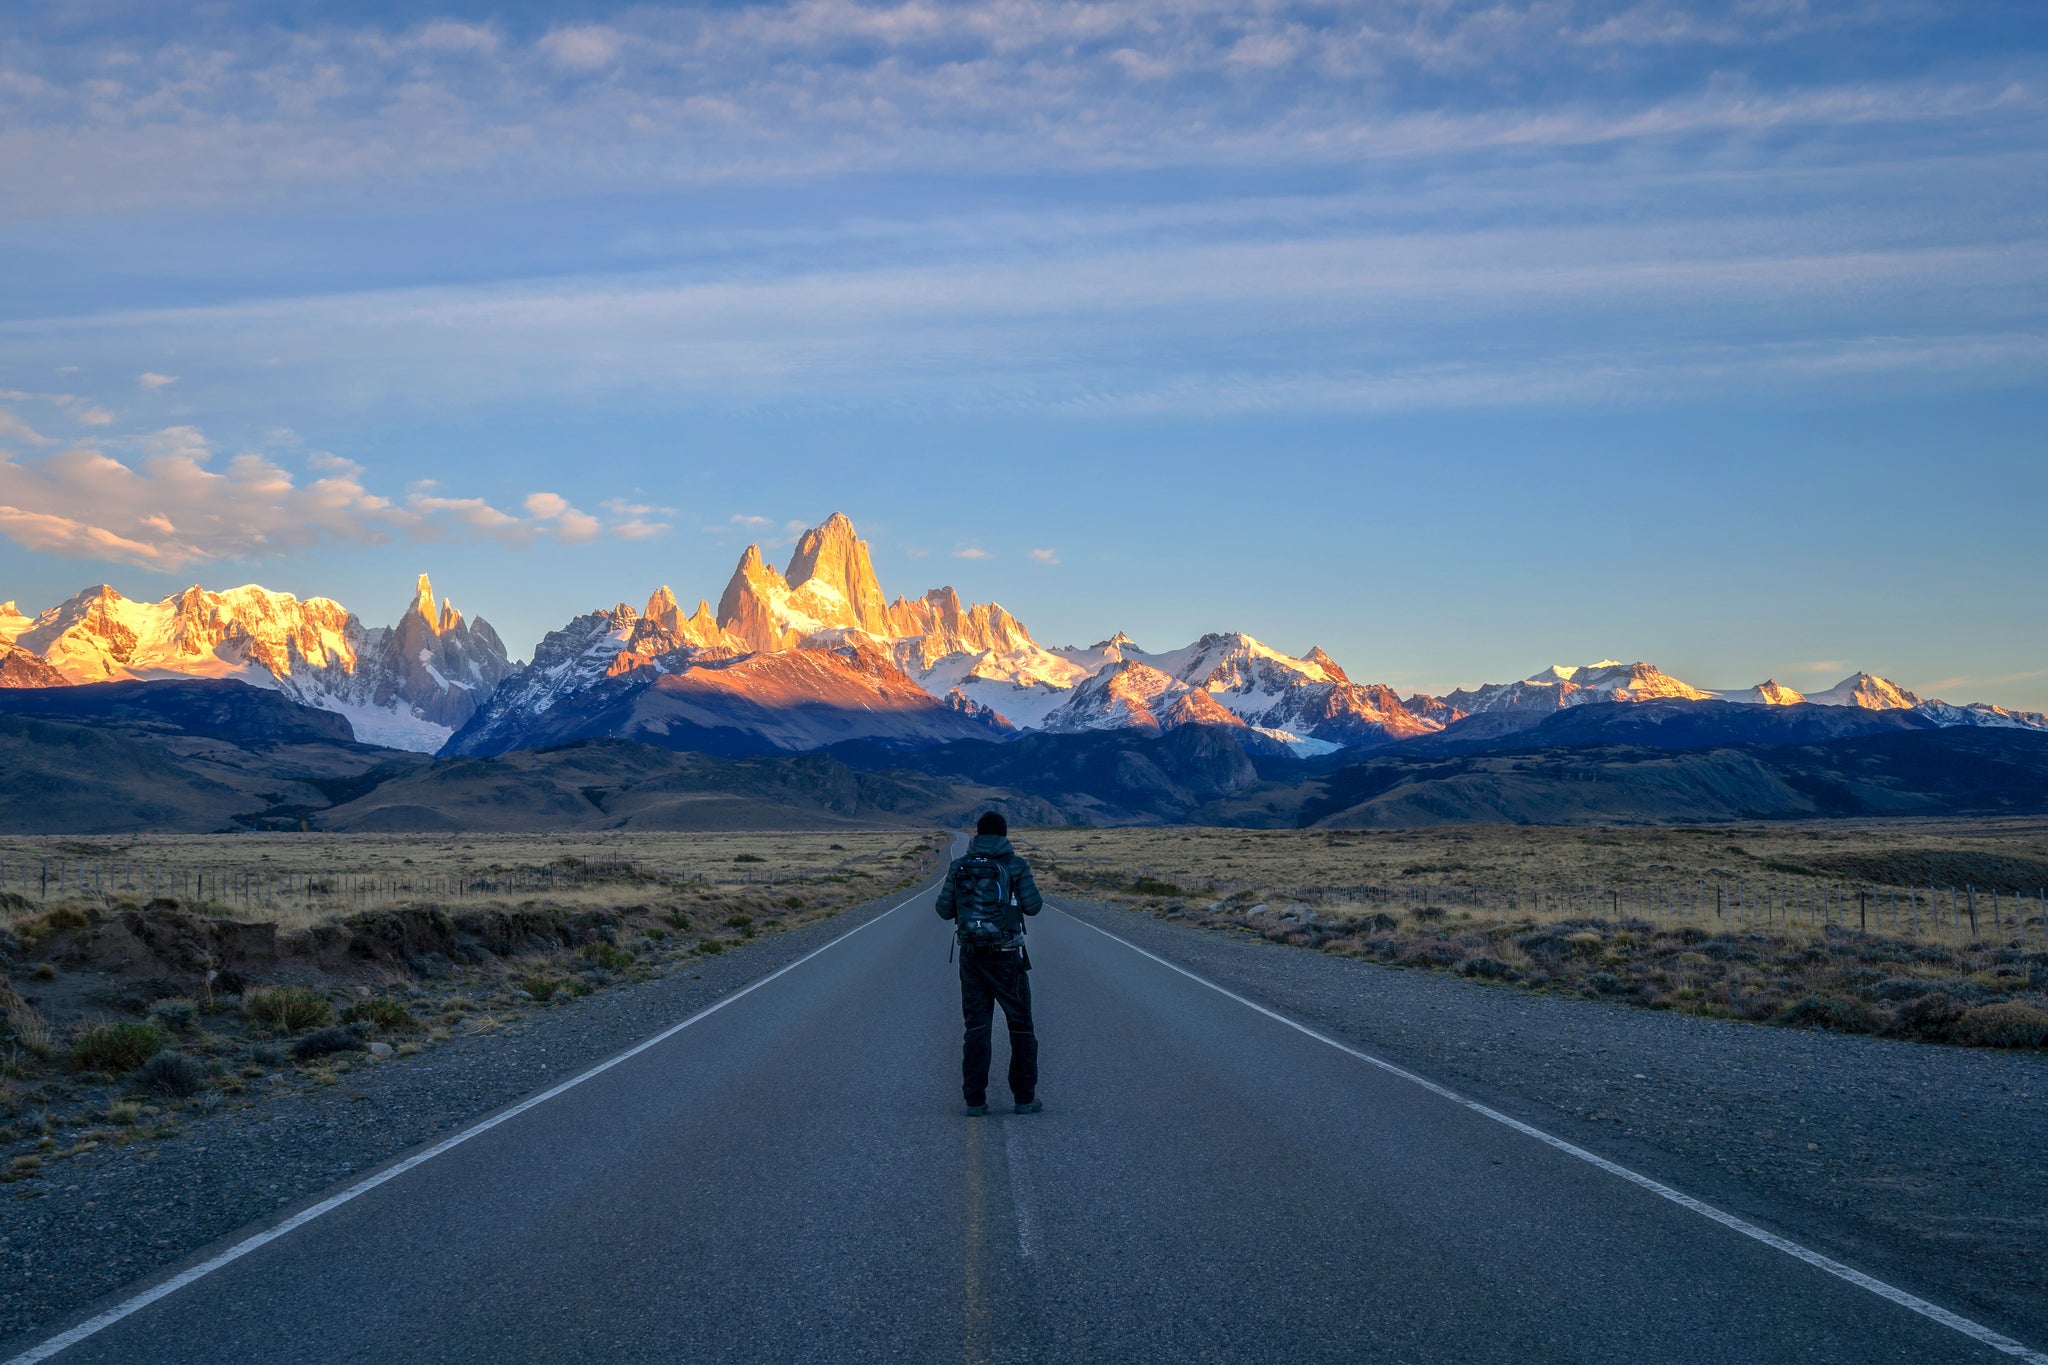 A Photography Trip to Patagonia